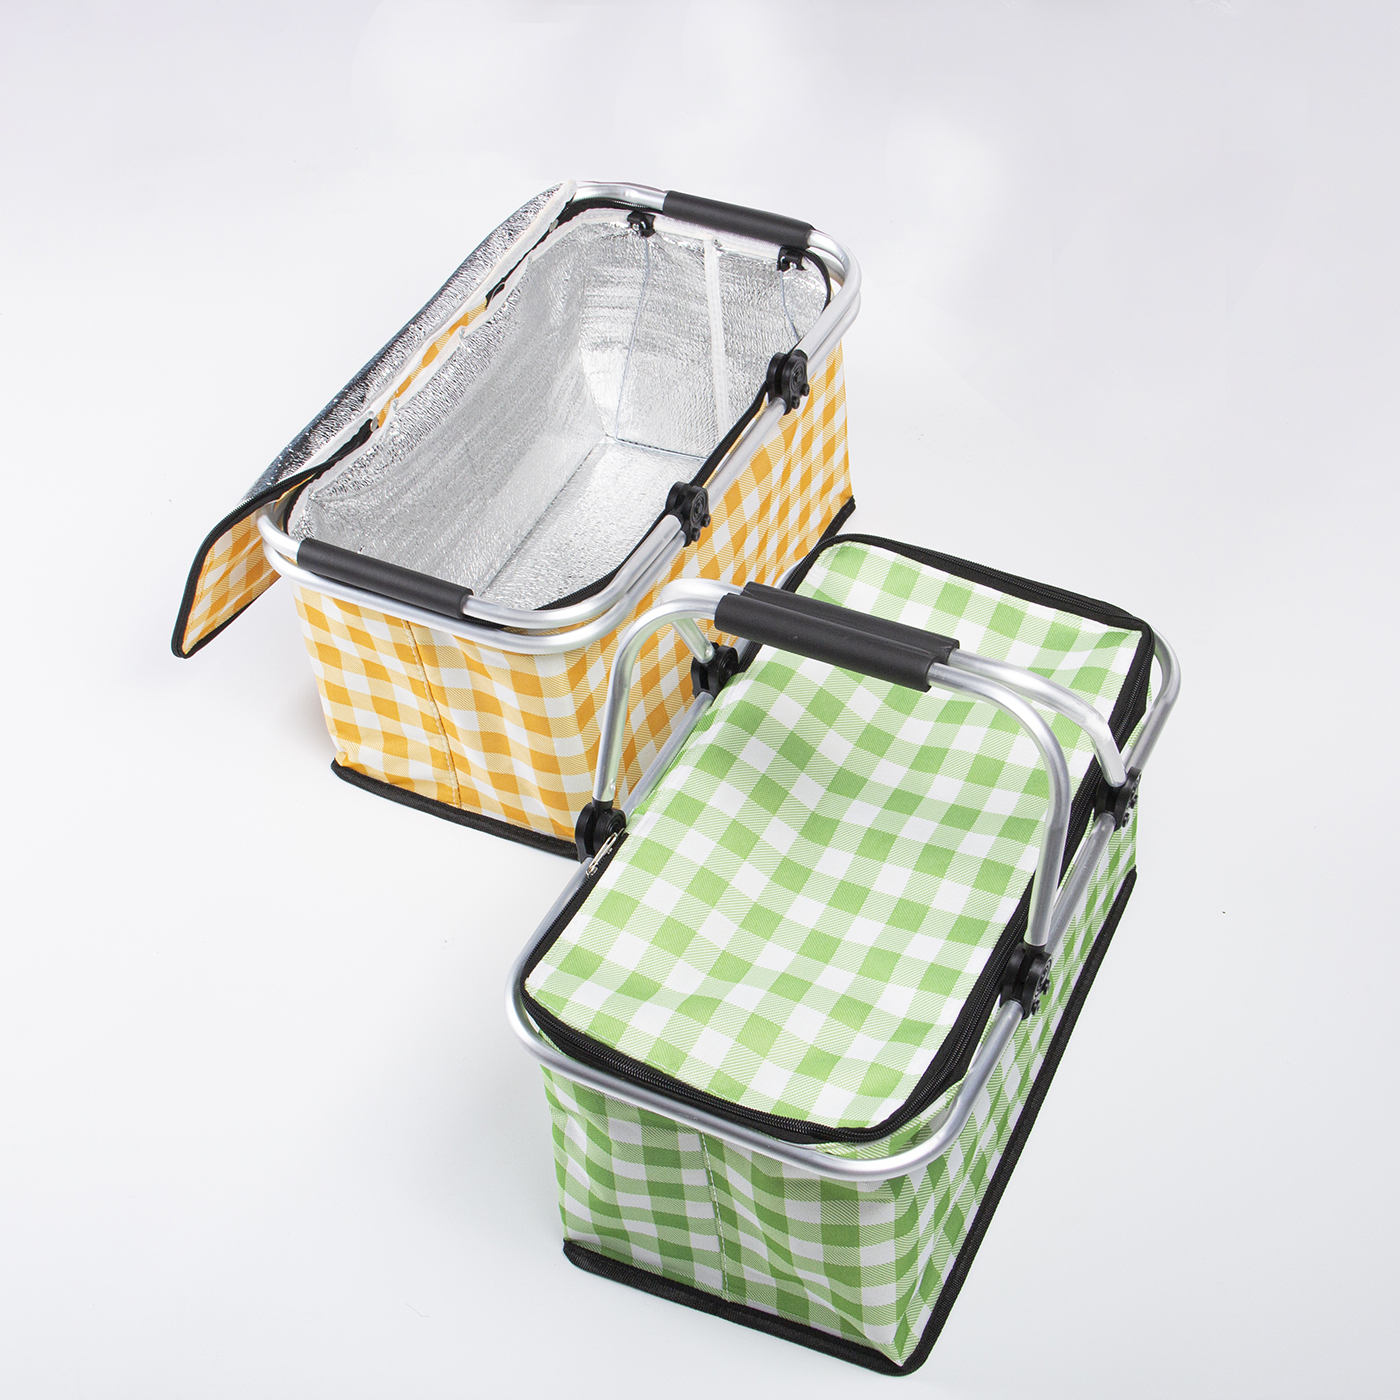 Foldable Insulated Picnic Basket4